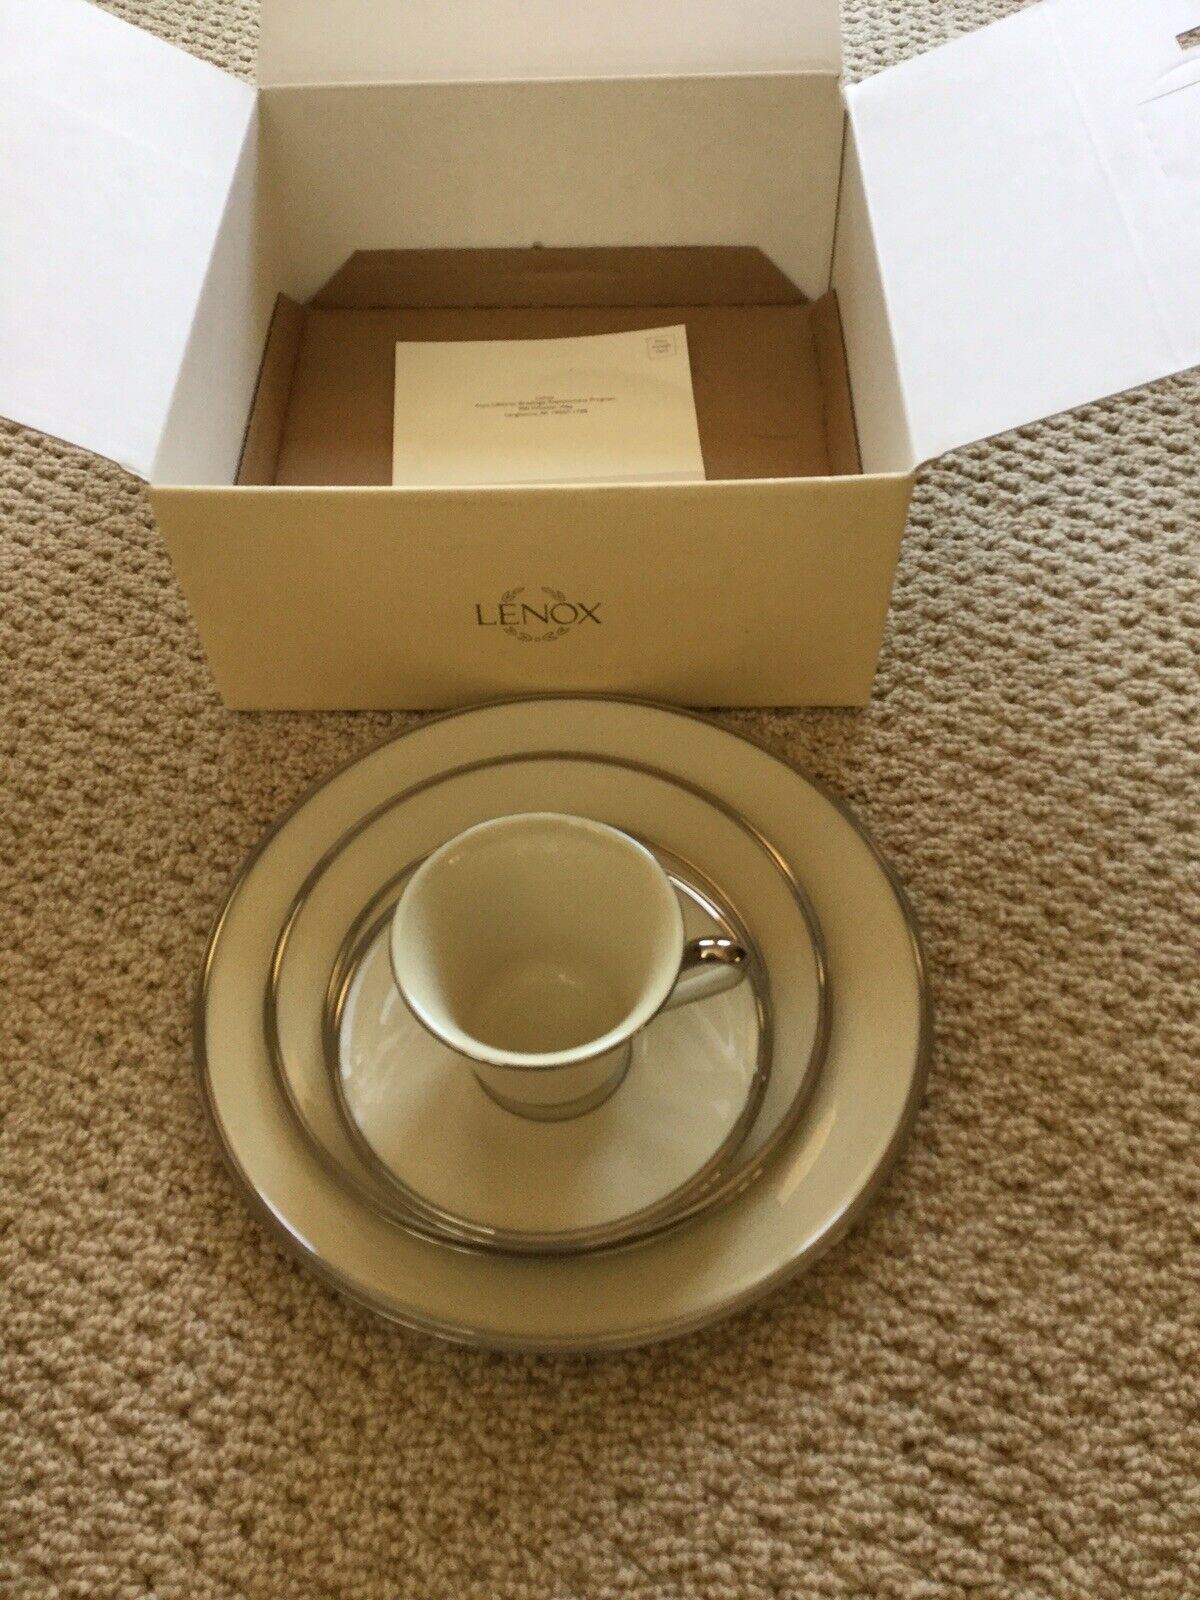 Lenox 5 Piece Place Setting Solitaire New In Box #140204030